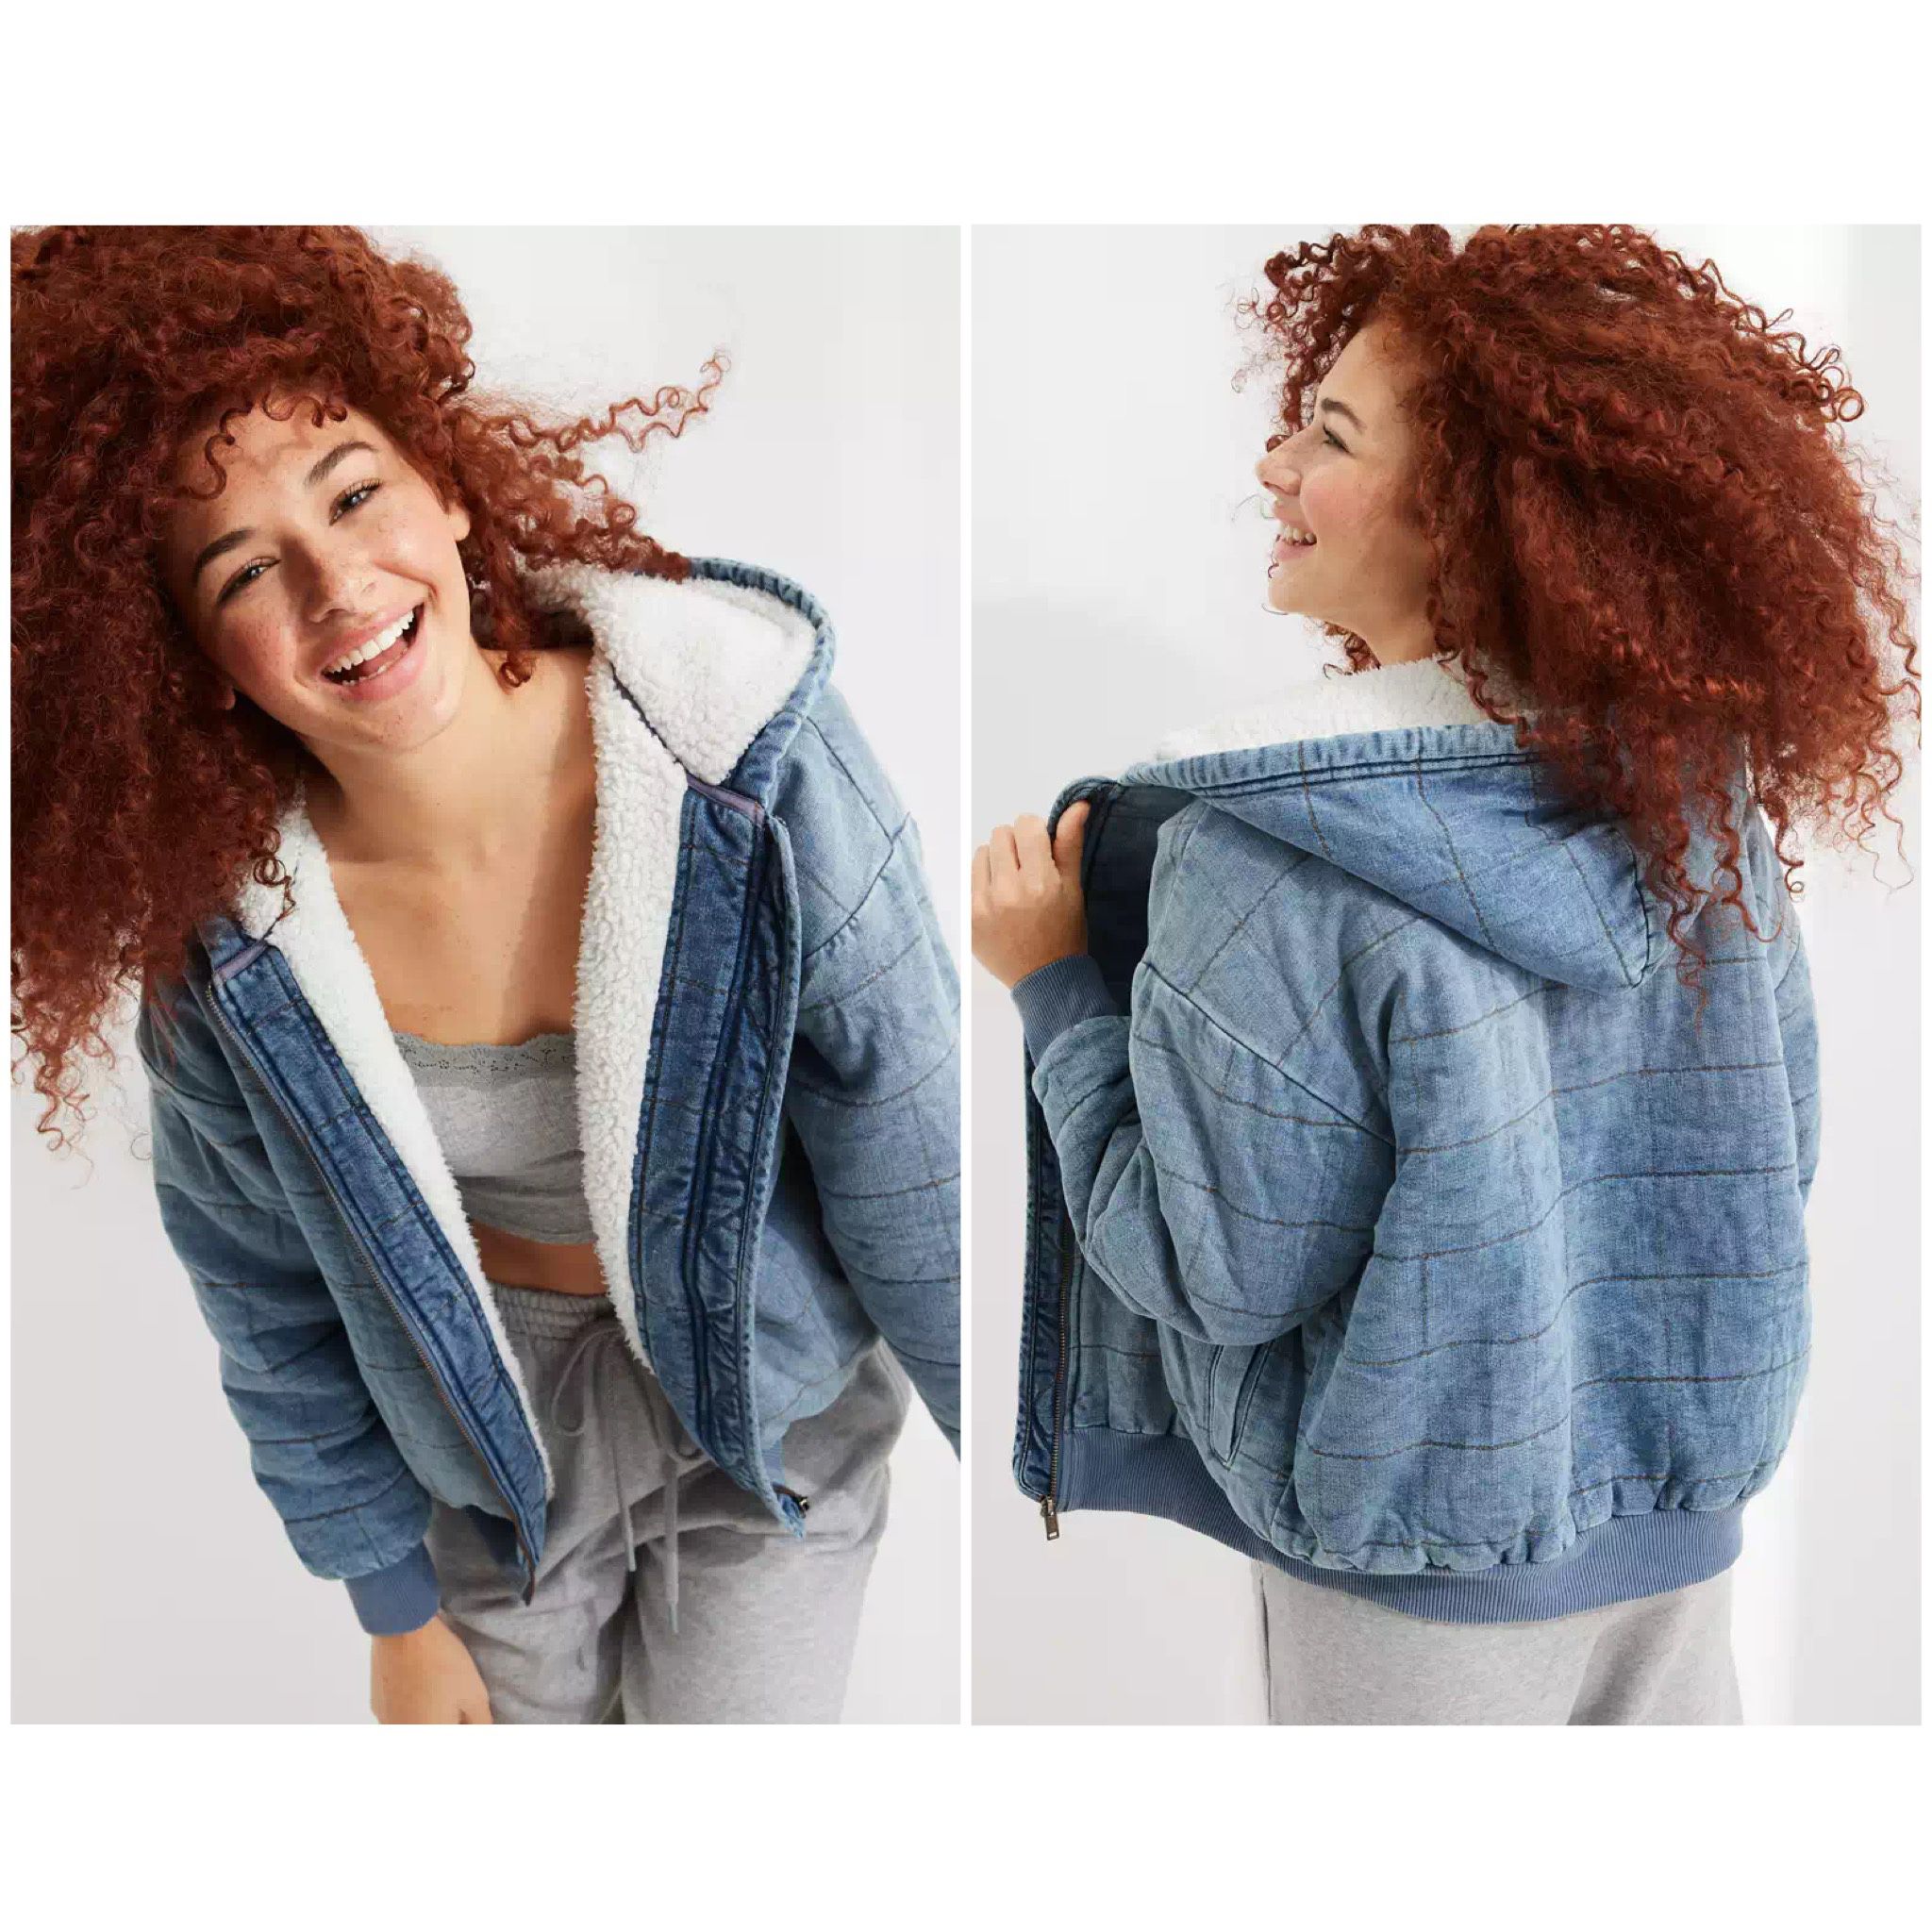 Aerie Sherpa Lined Denim Quilted Jacket